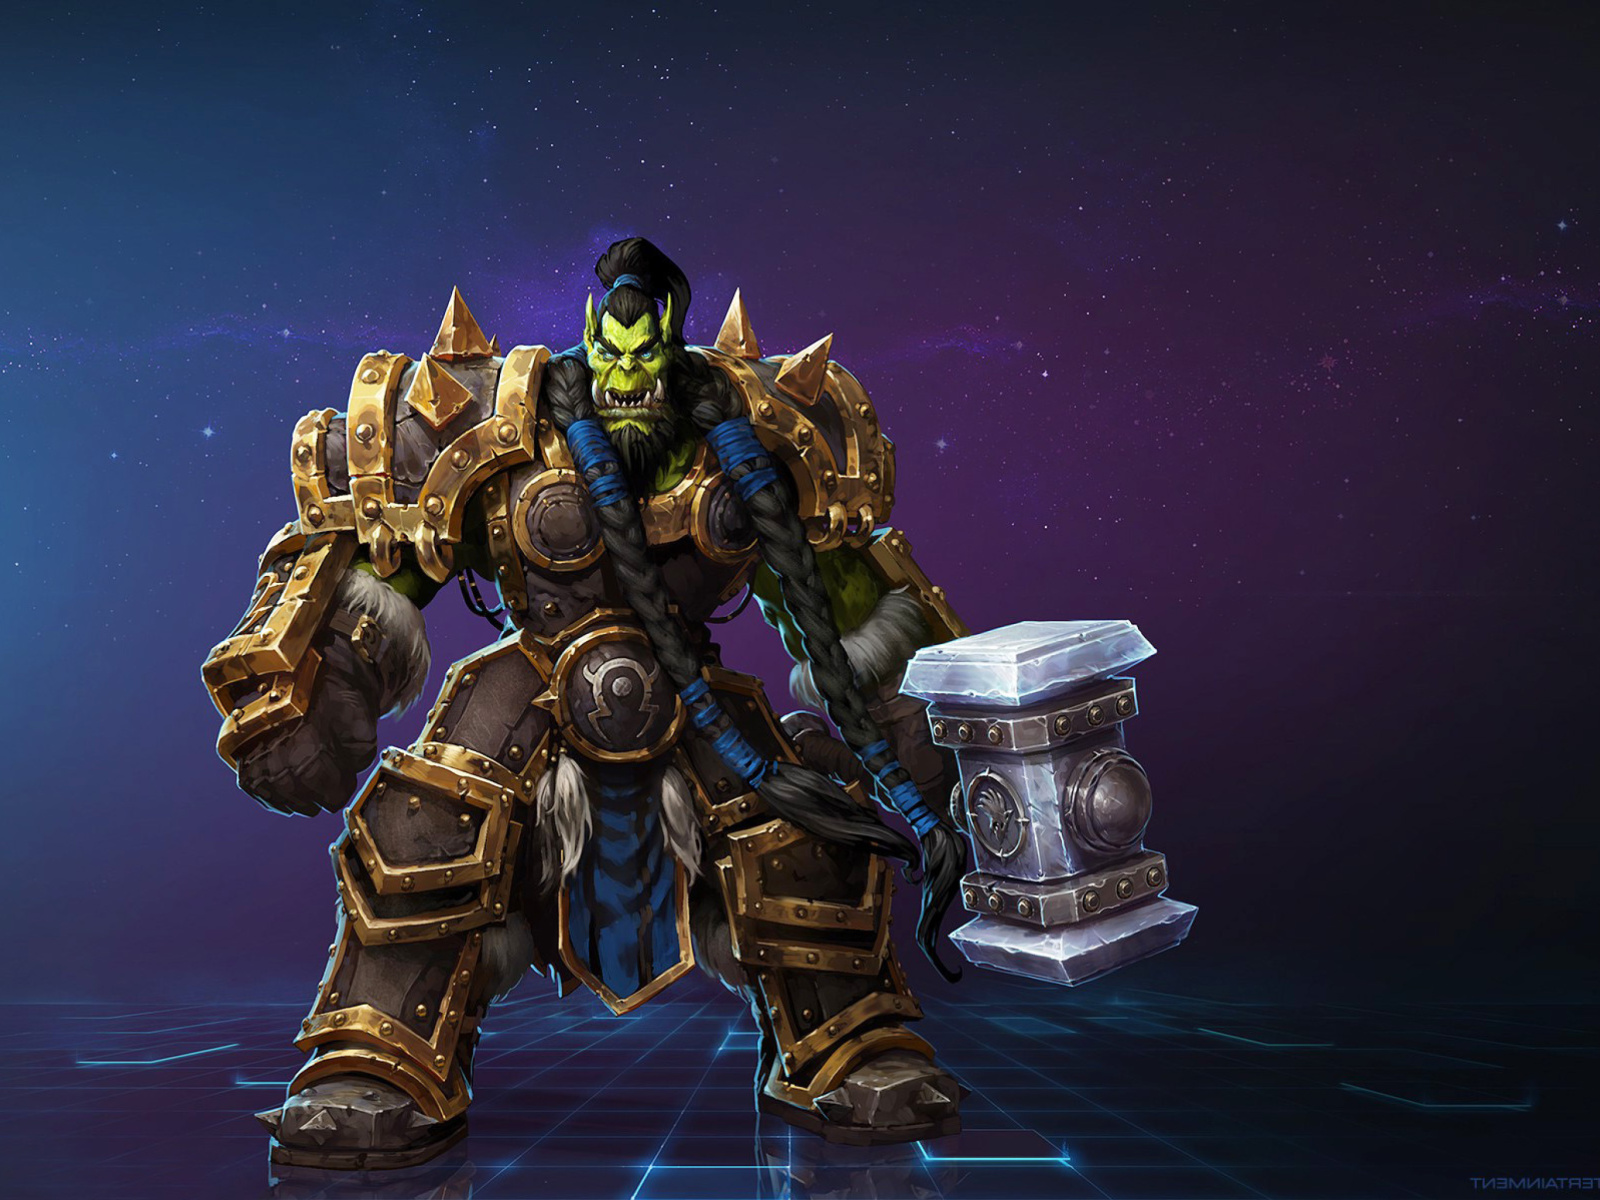 Sfondi Heroes of the Storm multiplayer online battle arena video game 1600x1200